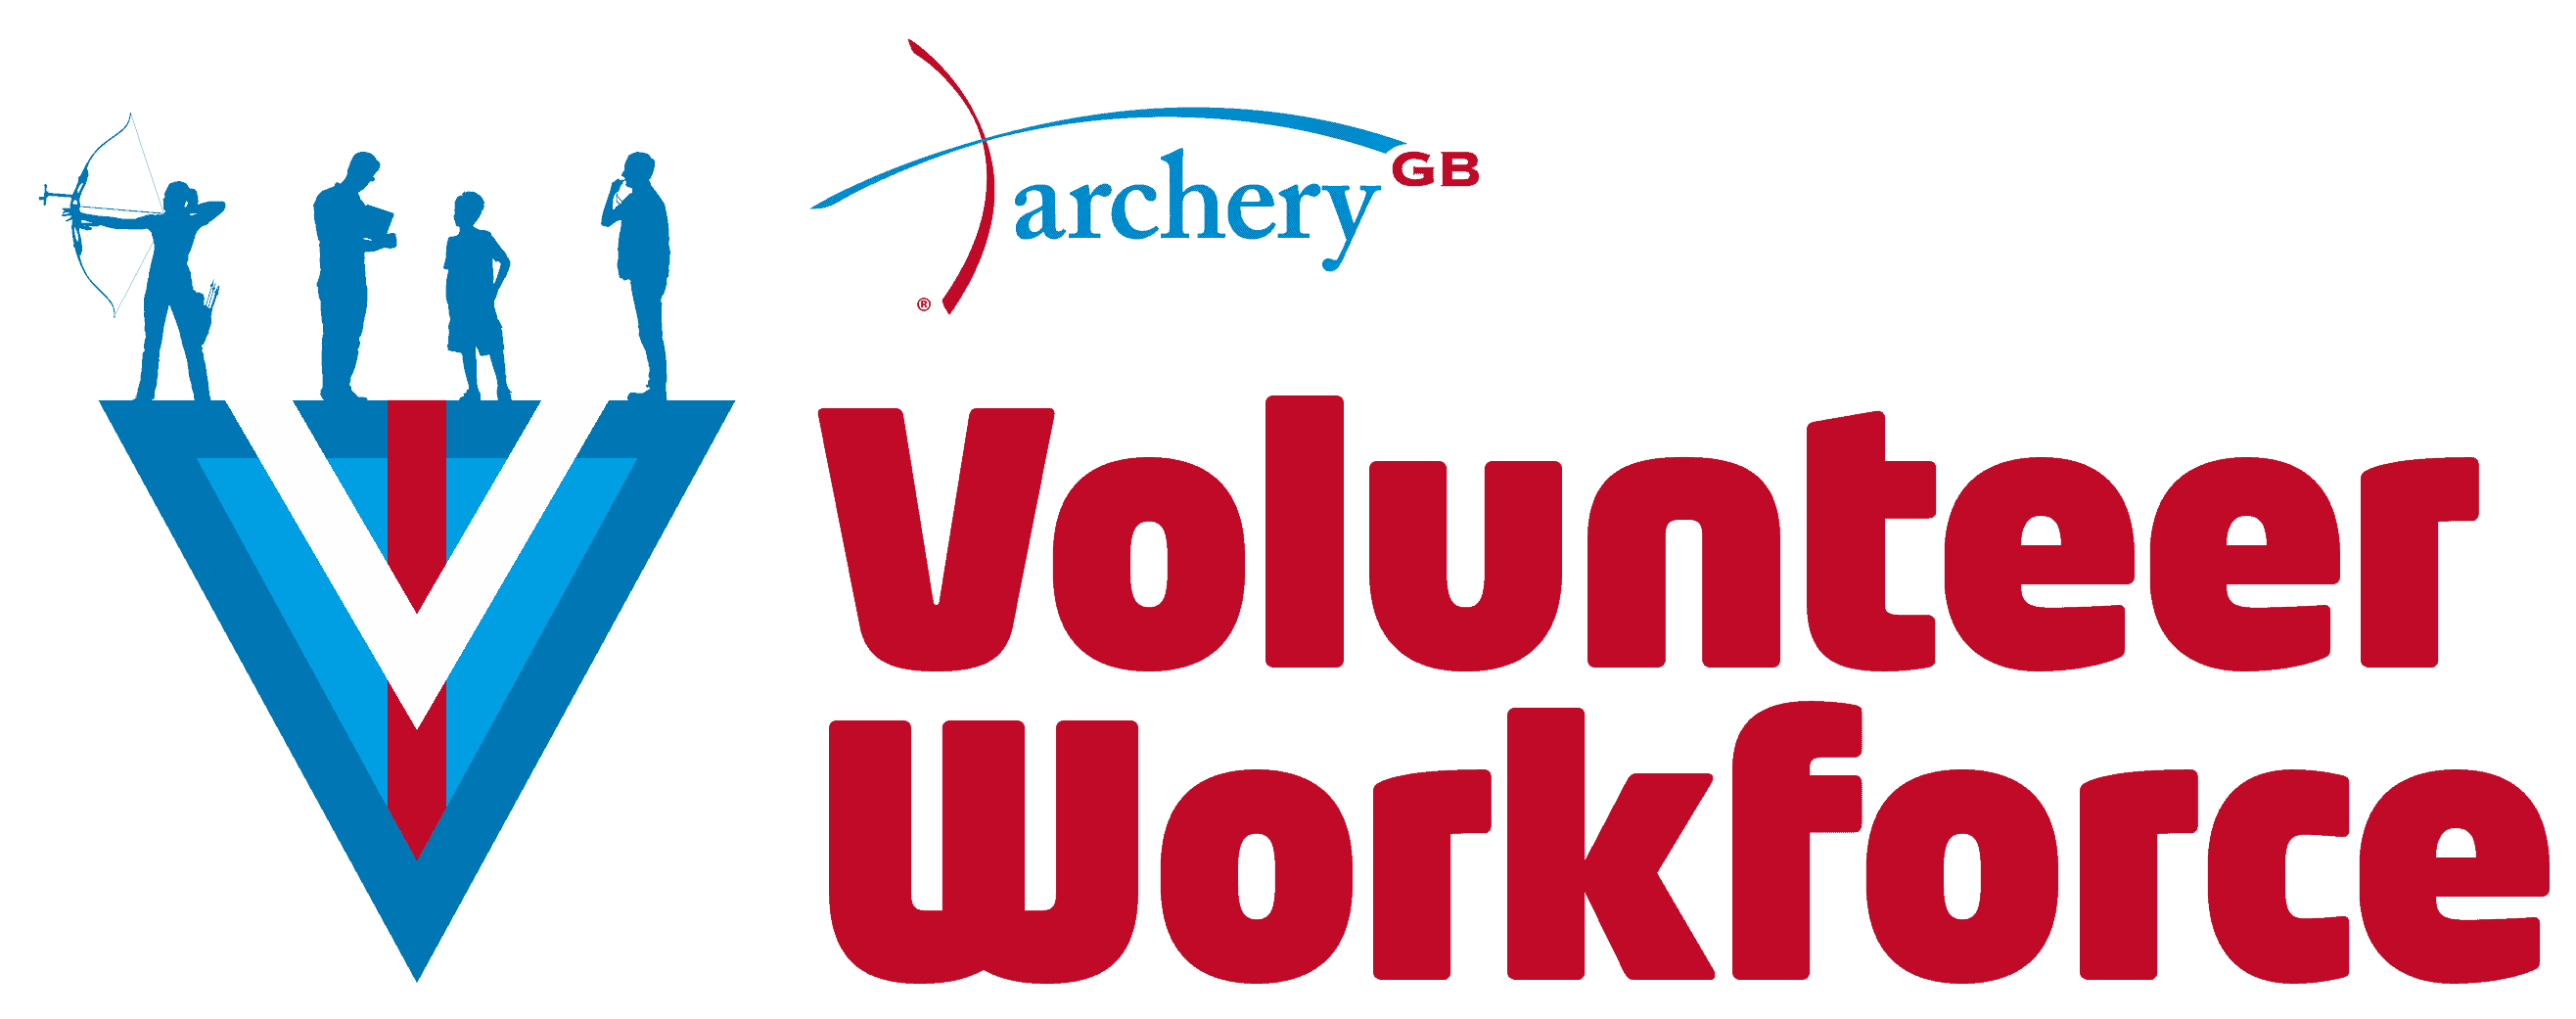 Improve Your Game - How to volunteer in archery